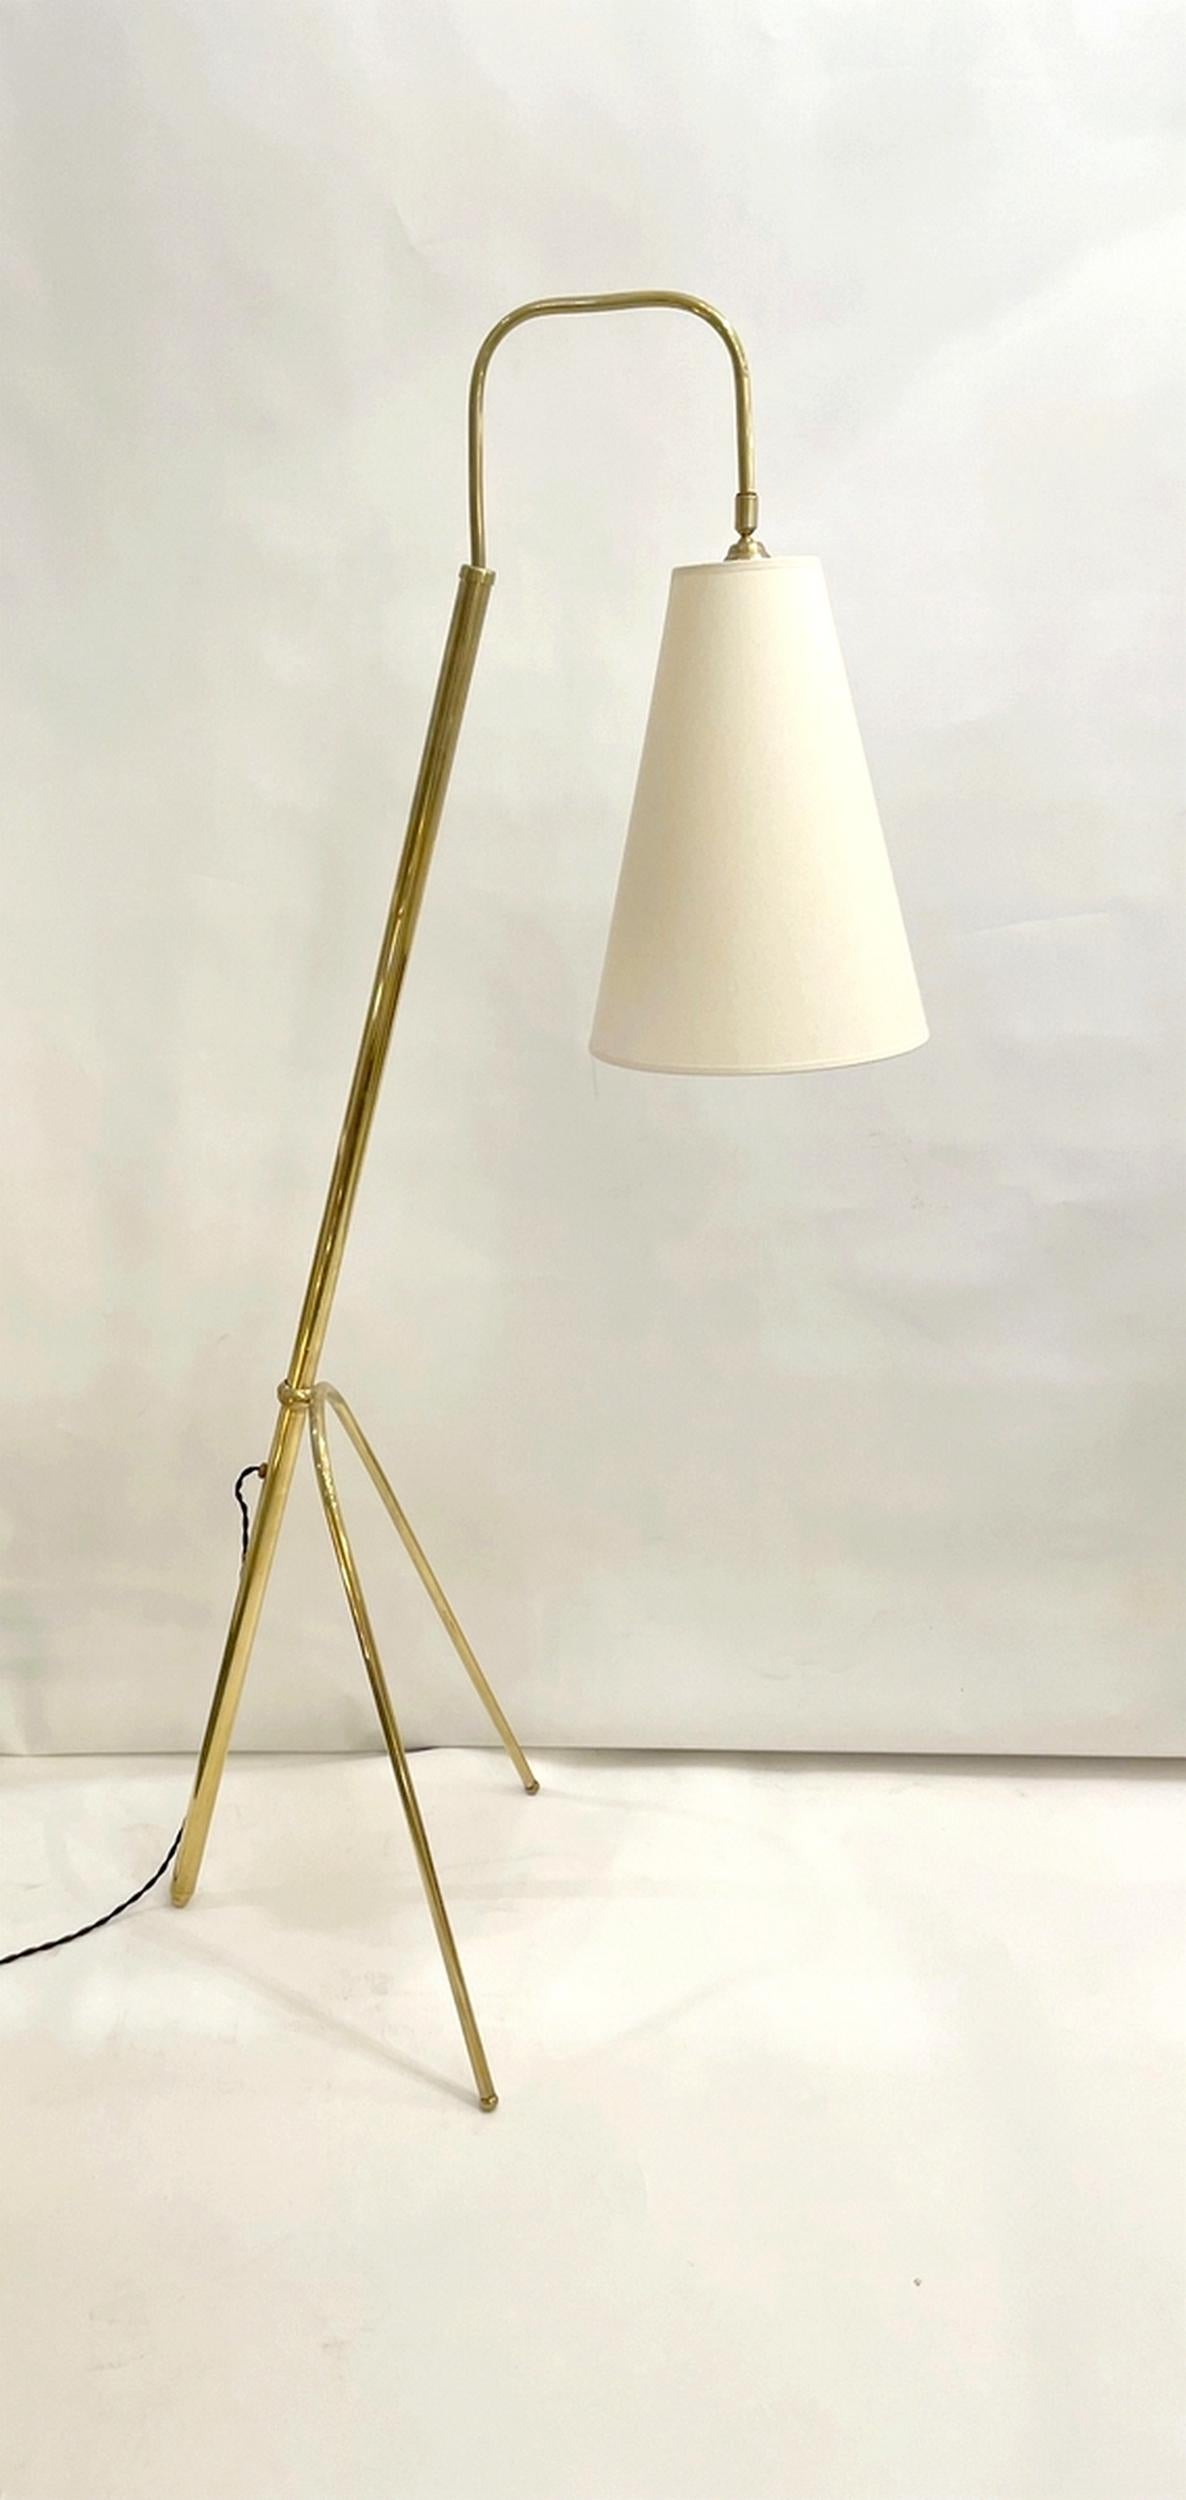 Extendable and adjustable floor lamp in polished brass from the 1960s.
Shade are mounted on a swivel ball joint and the arm of light is extensible.
The shade is new, redone identical to the original.
Height: Between 143 cm (56.3 inches) and 182 cm